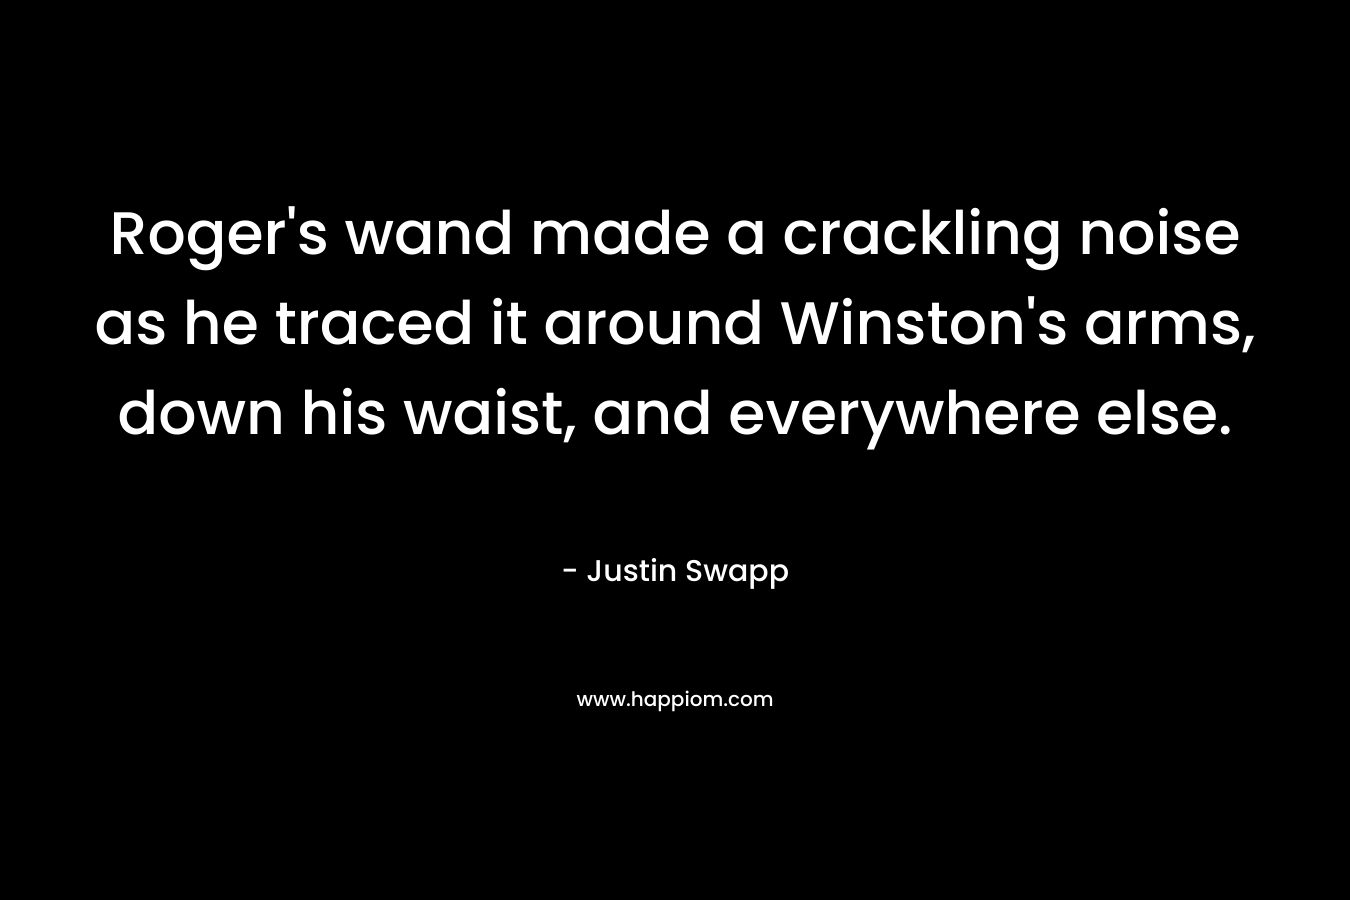 Roger’s wand made a crackling noise as he traced it around Winston’s arms, down his waist, and everywhere else. – Justin Swapp